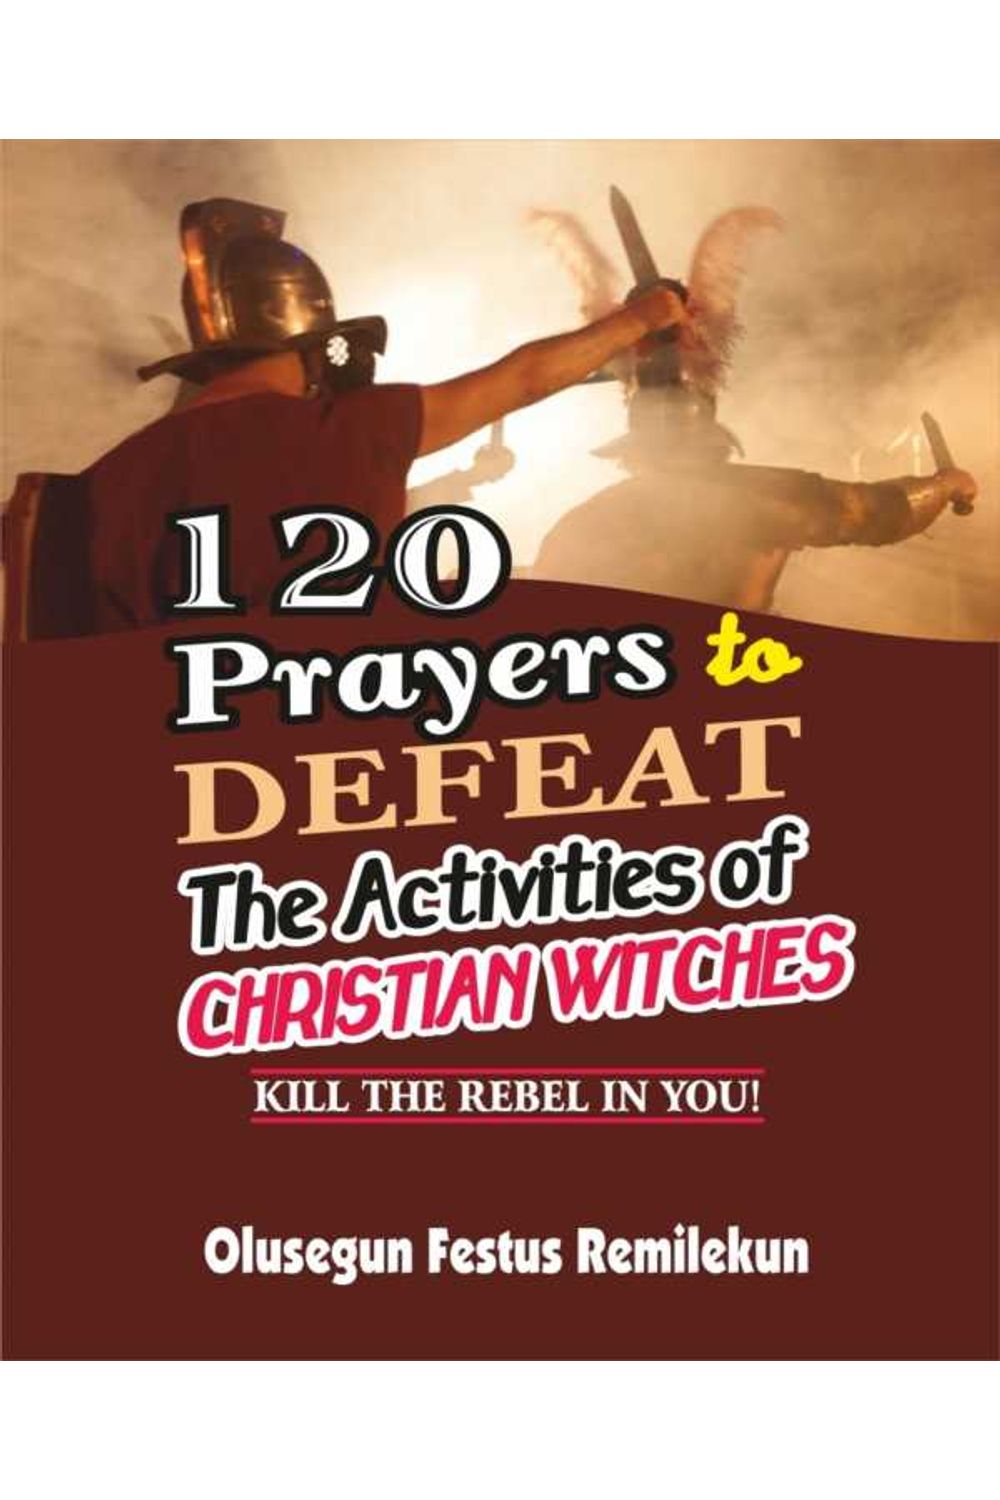 bw-120-prayers-to-defeat-the-activities-of-christian-witches-bookrix-9783748707400